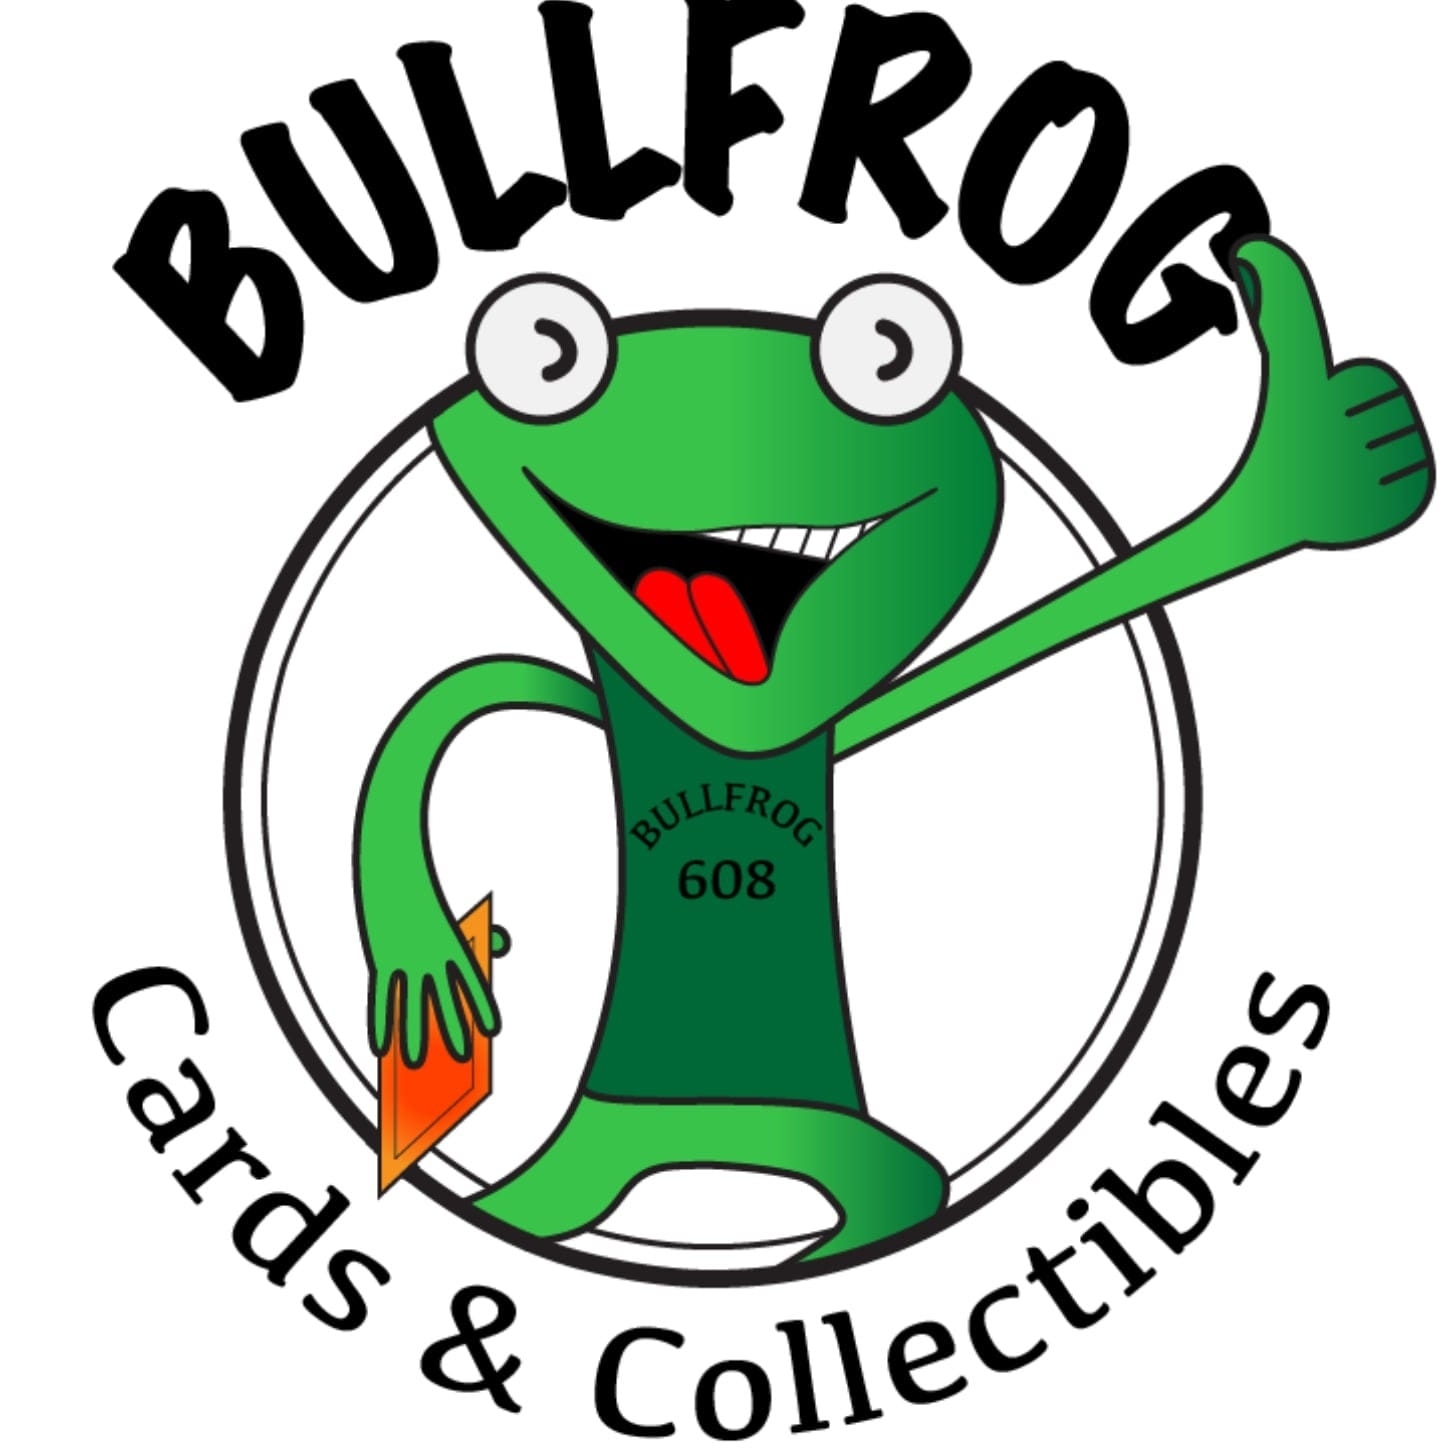 BullFrog Cards and Collectibles